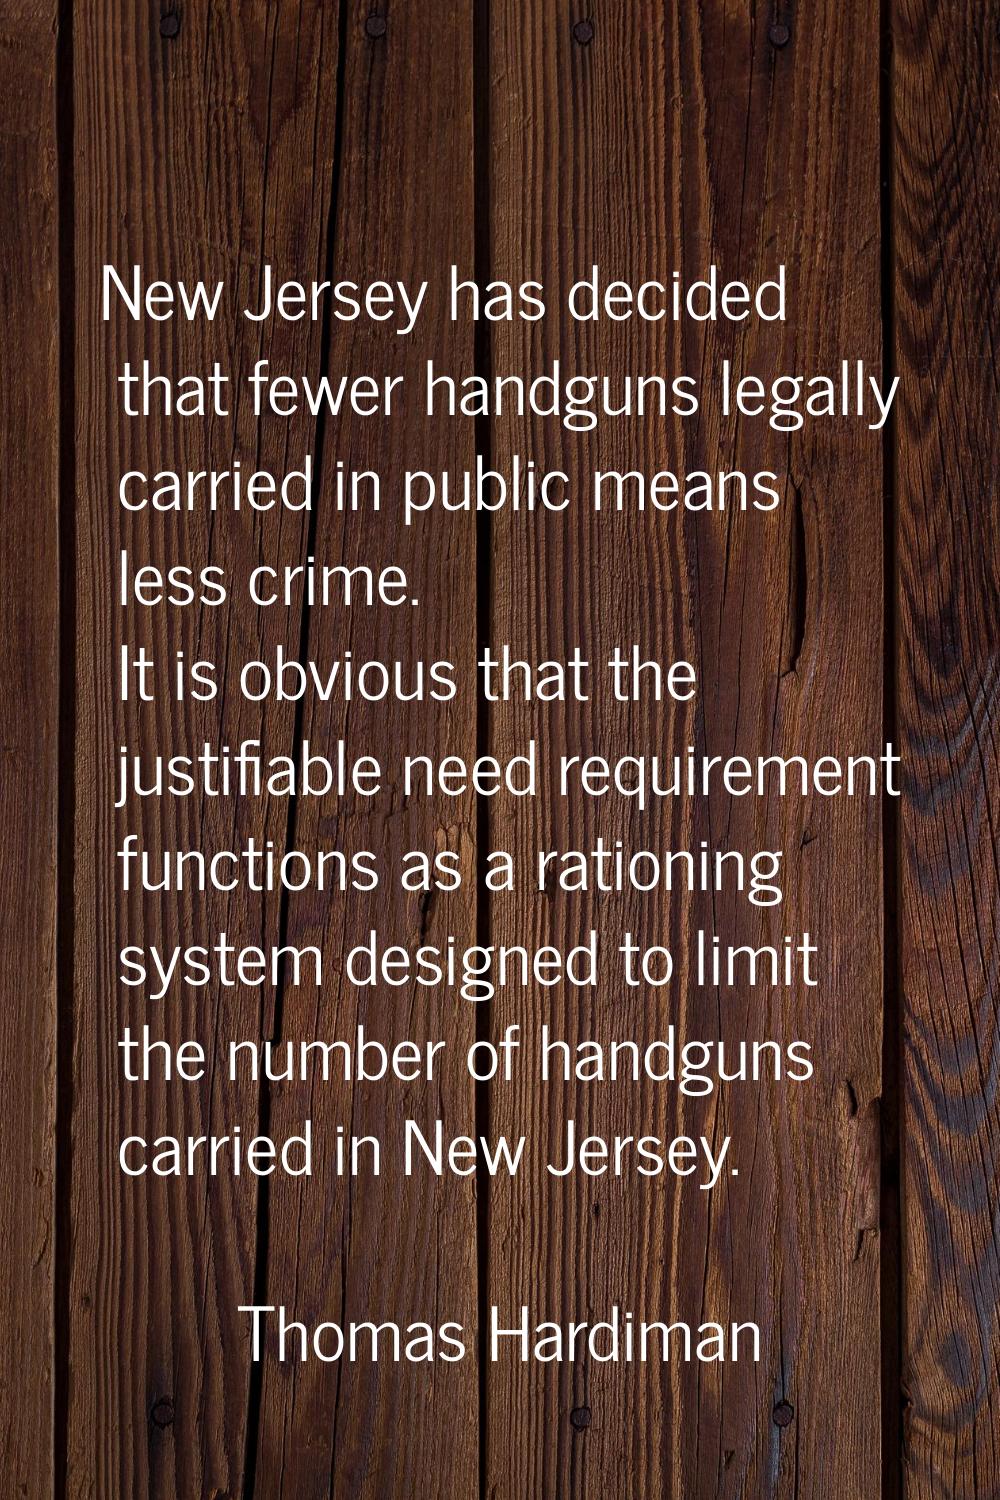 New Jersey has decided that fewer handguns legally carried in public means less crime. It is obviou